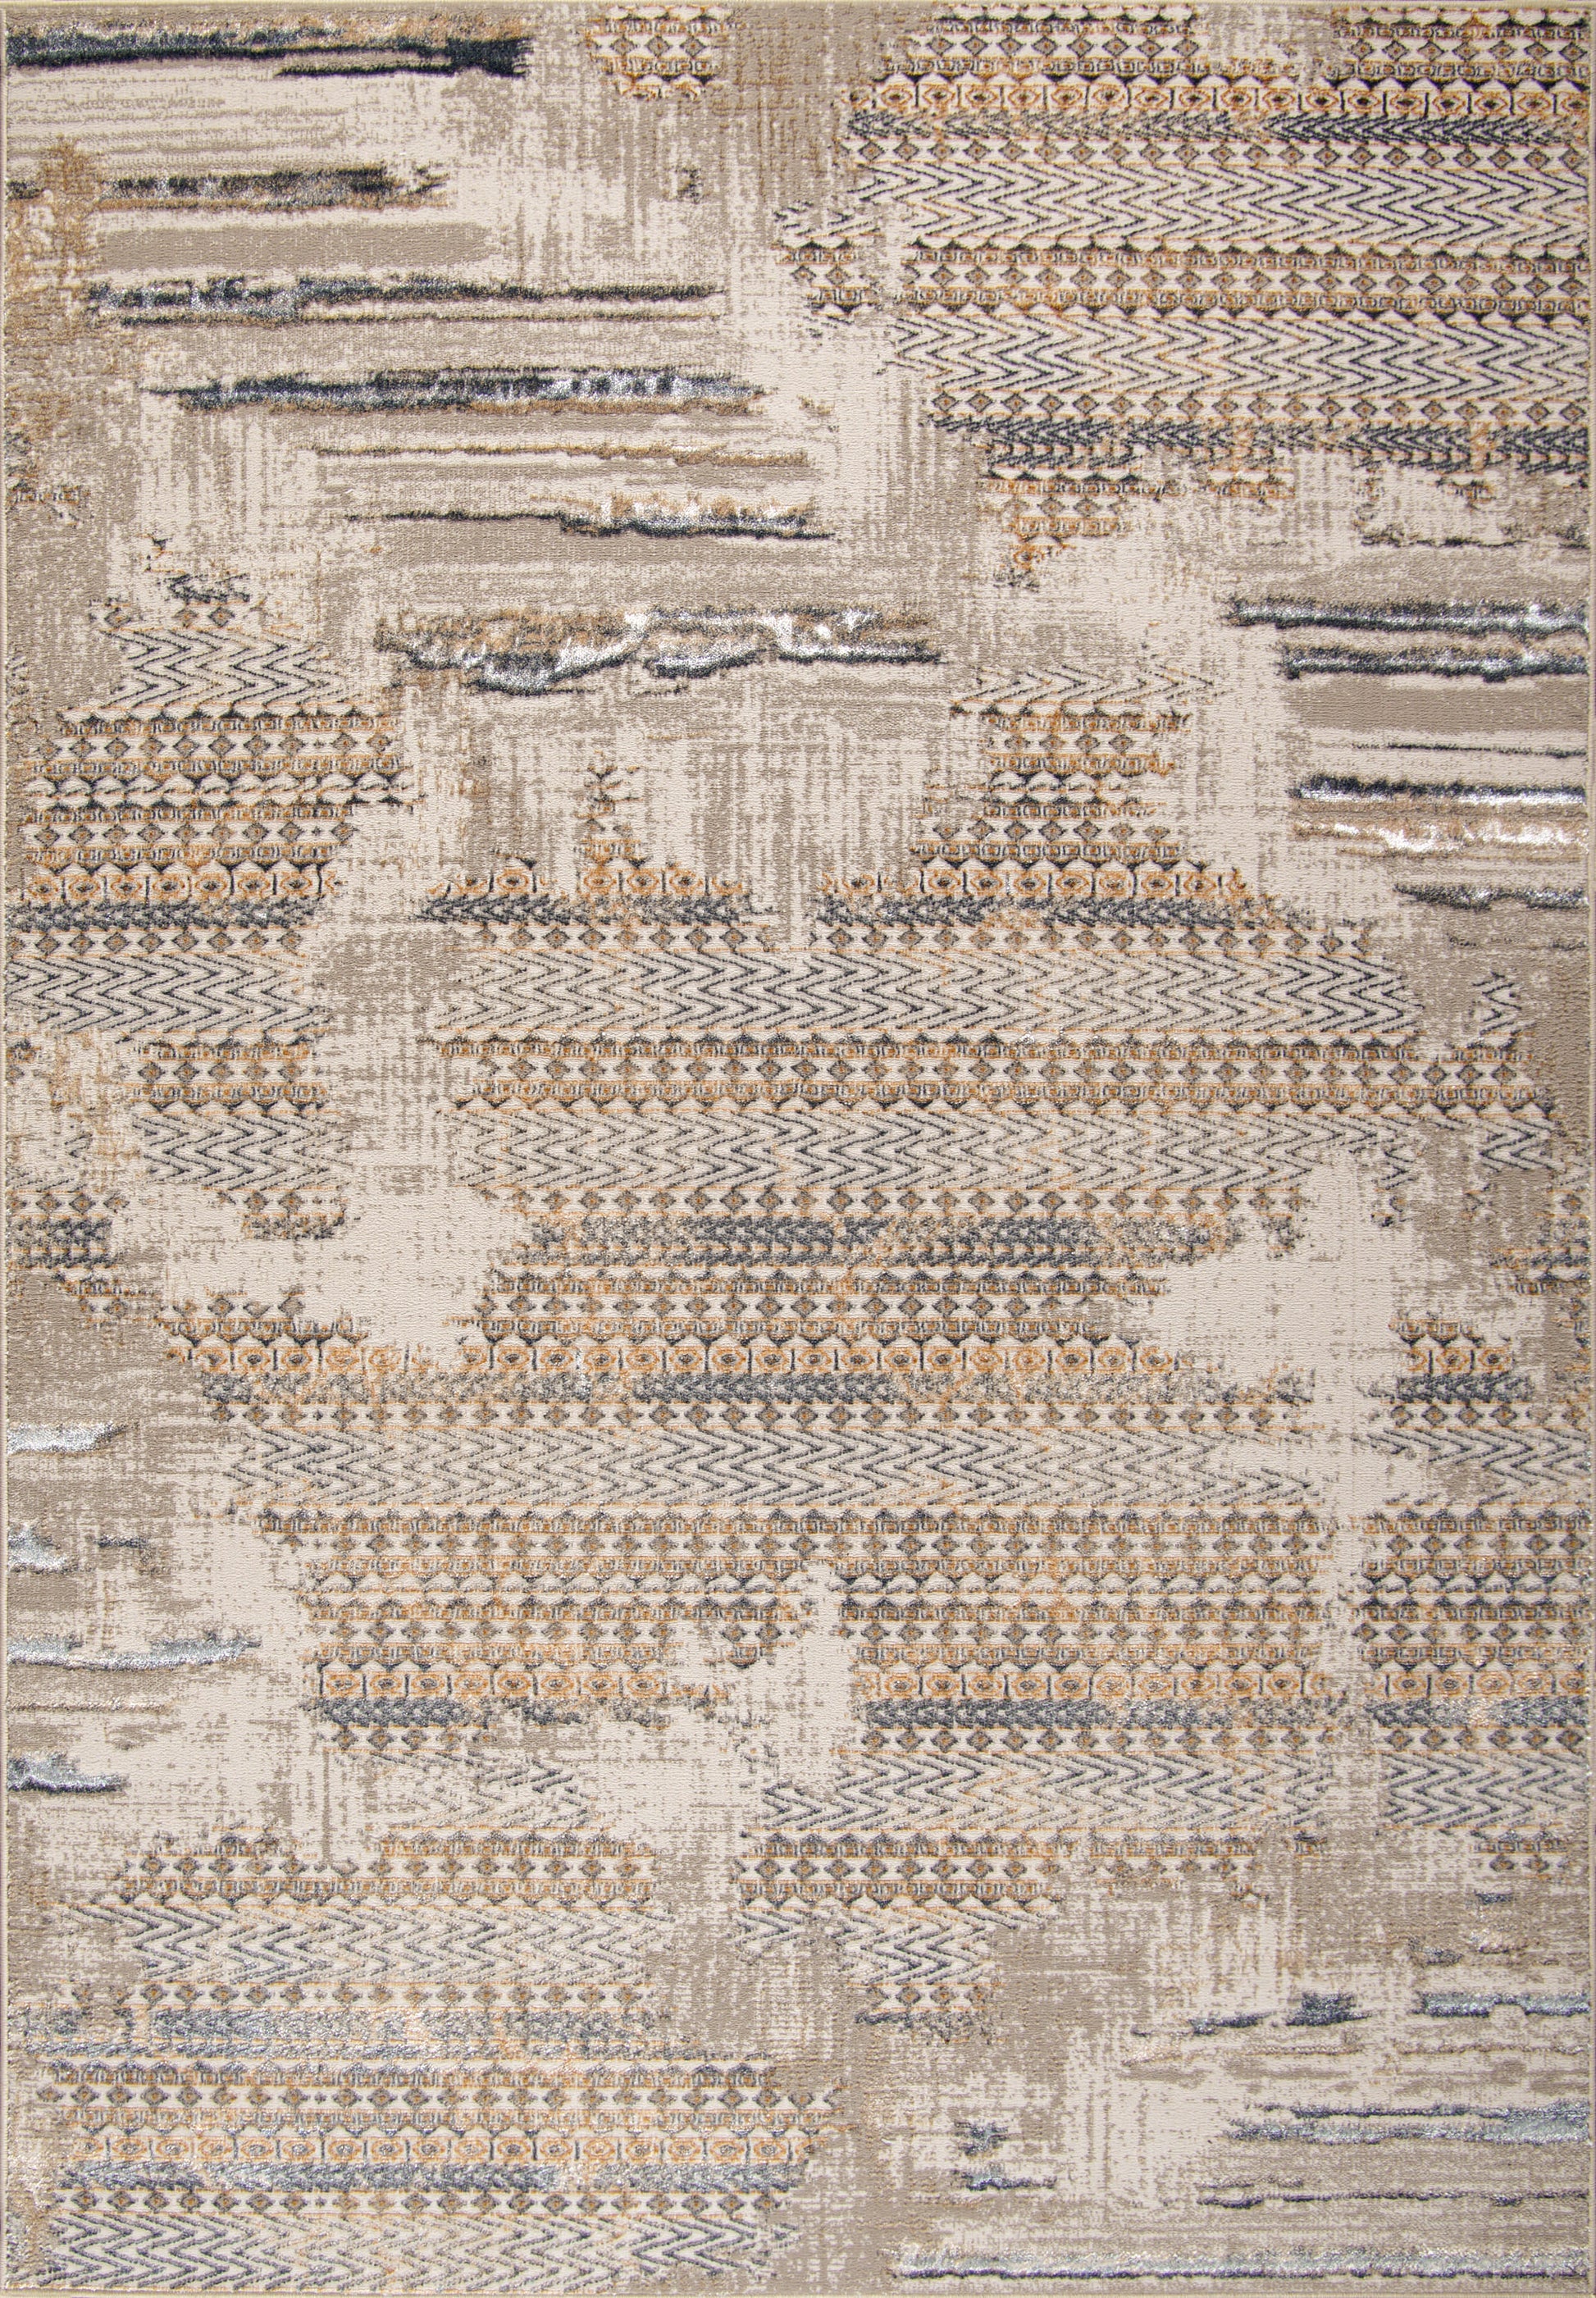 beige brown grey metalic abstract rustic modern contemporary area rug 4x6, 4x5 ft Small Carpet, Home Office, Living Room, Bedroom